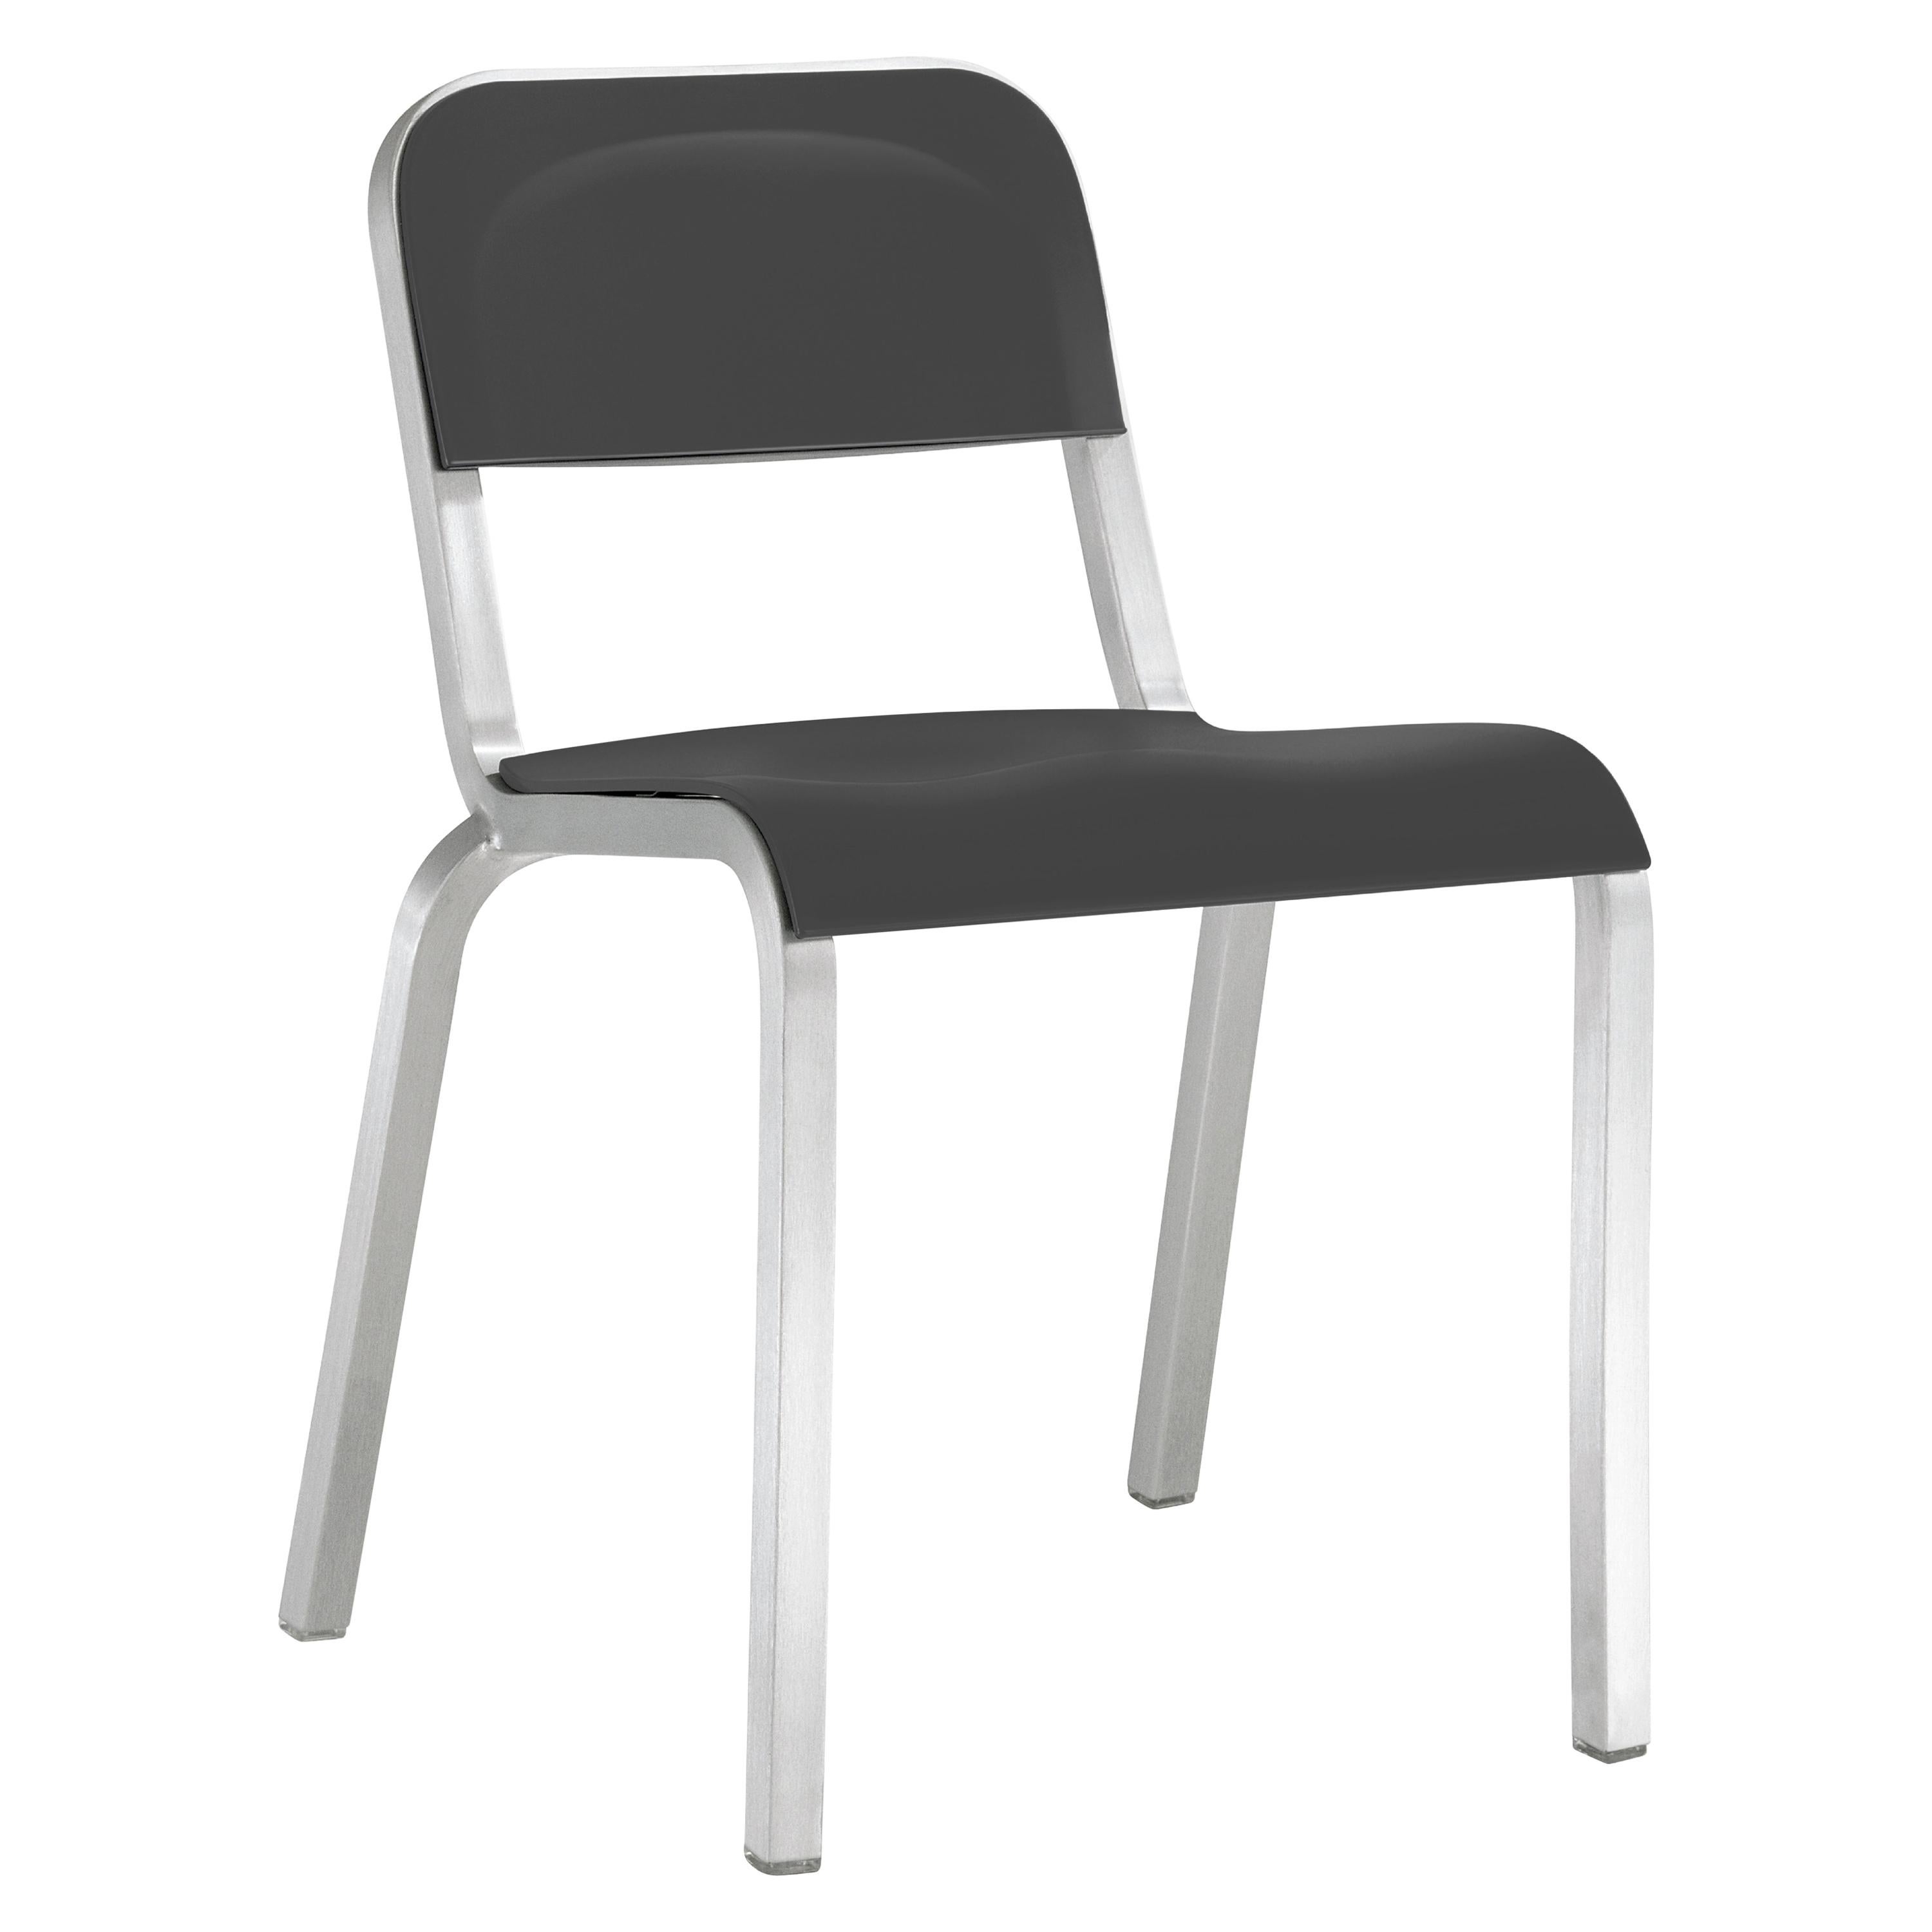 Emeco 1951 Aluminum Stacking Chair with Lava Black Seat by Adrian Van Hooydonk For Sale